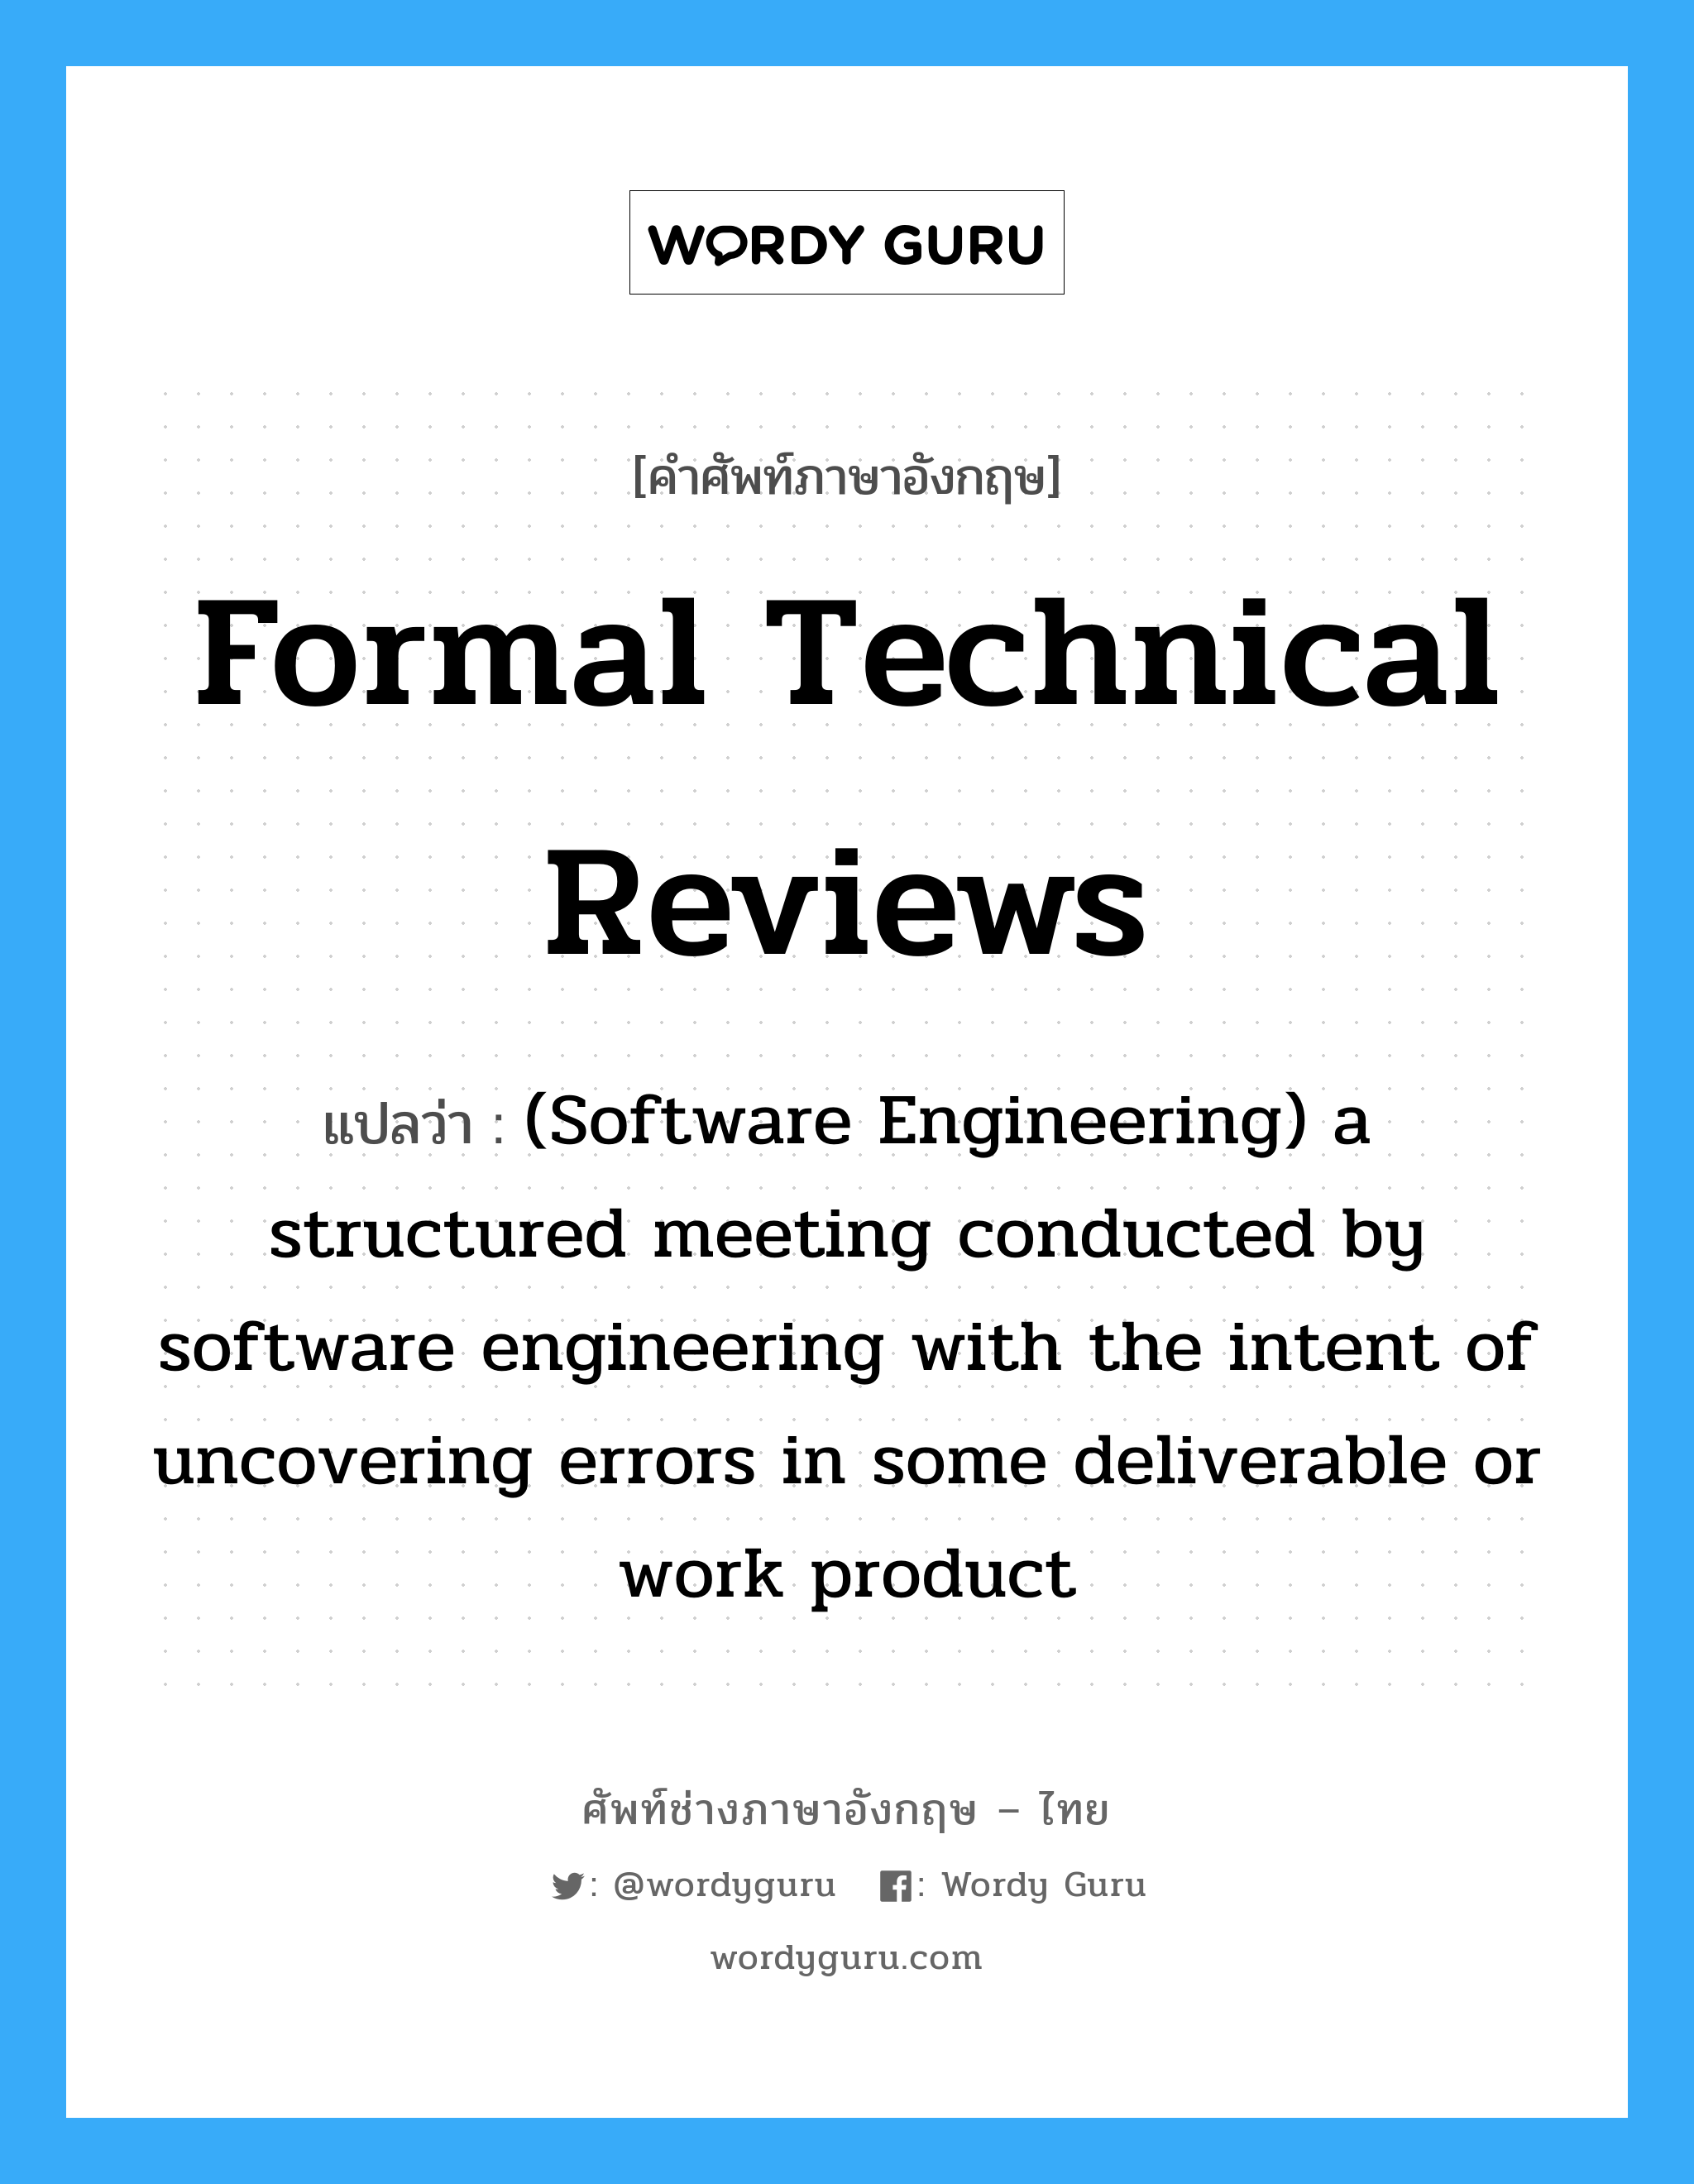 Formal technical reviews แปลว่า?, คำศัพท์ช่างภาษาอังกฤษ - ไทย Formal technical reviews คำศัพท์ภาษาอังกฤษ Formal technical reviews แปลว่า (Software Engineering) a structured meeting conducted by software engineering with the intent of uncovering errors in some deliverable or work product